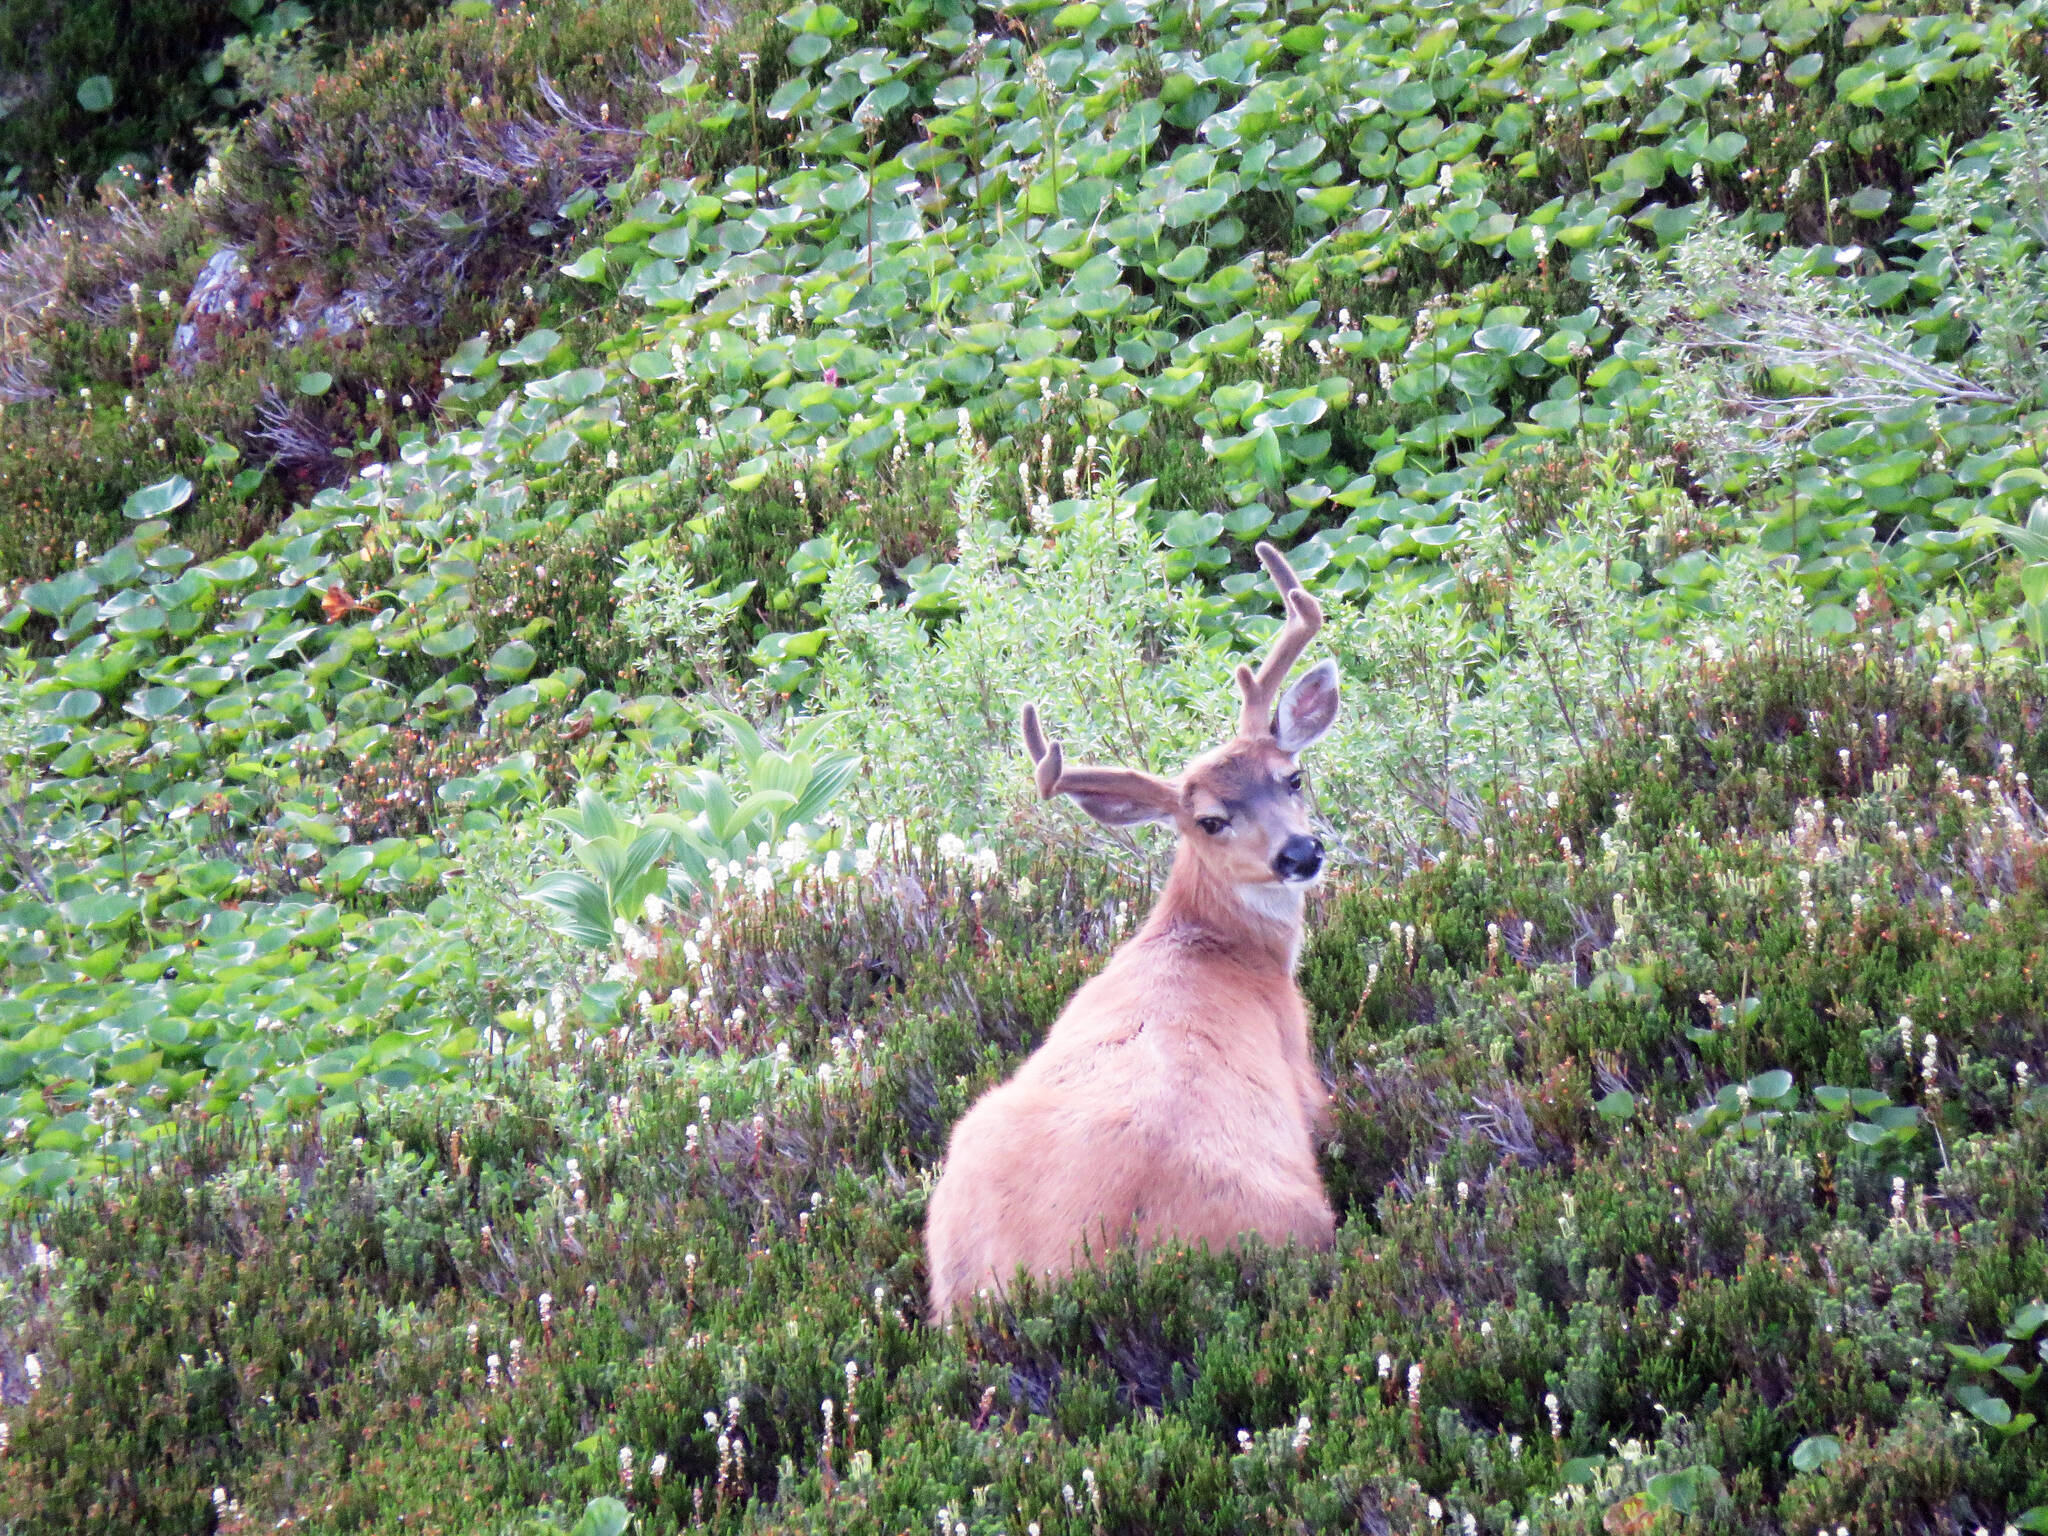 Courtesy Photo / Mary Catharine Martin 
A deer rests in the alpine of the Tongass National Forest, on Admiralty Island.